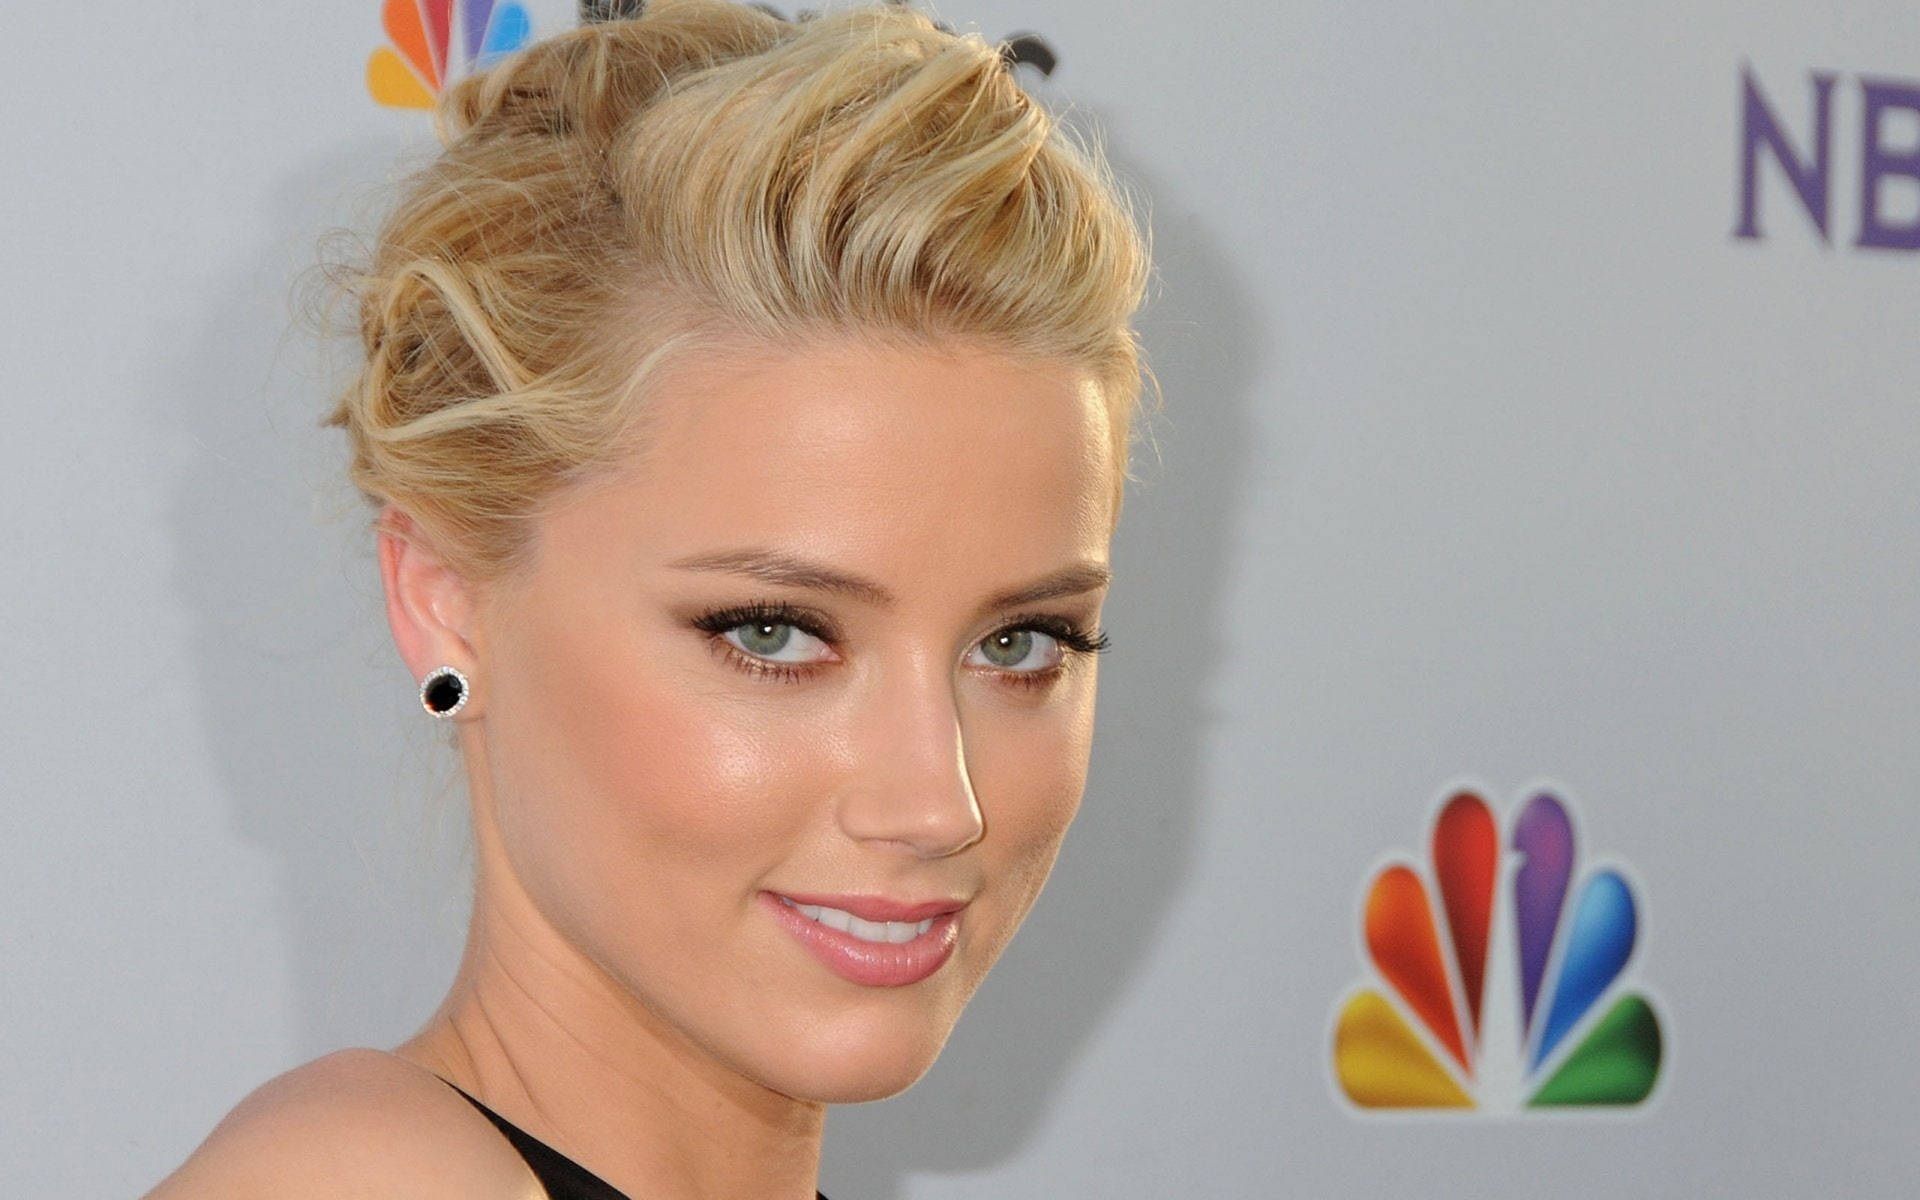 Amberheard Nbc All-star Party Would Be Translated To 